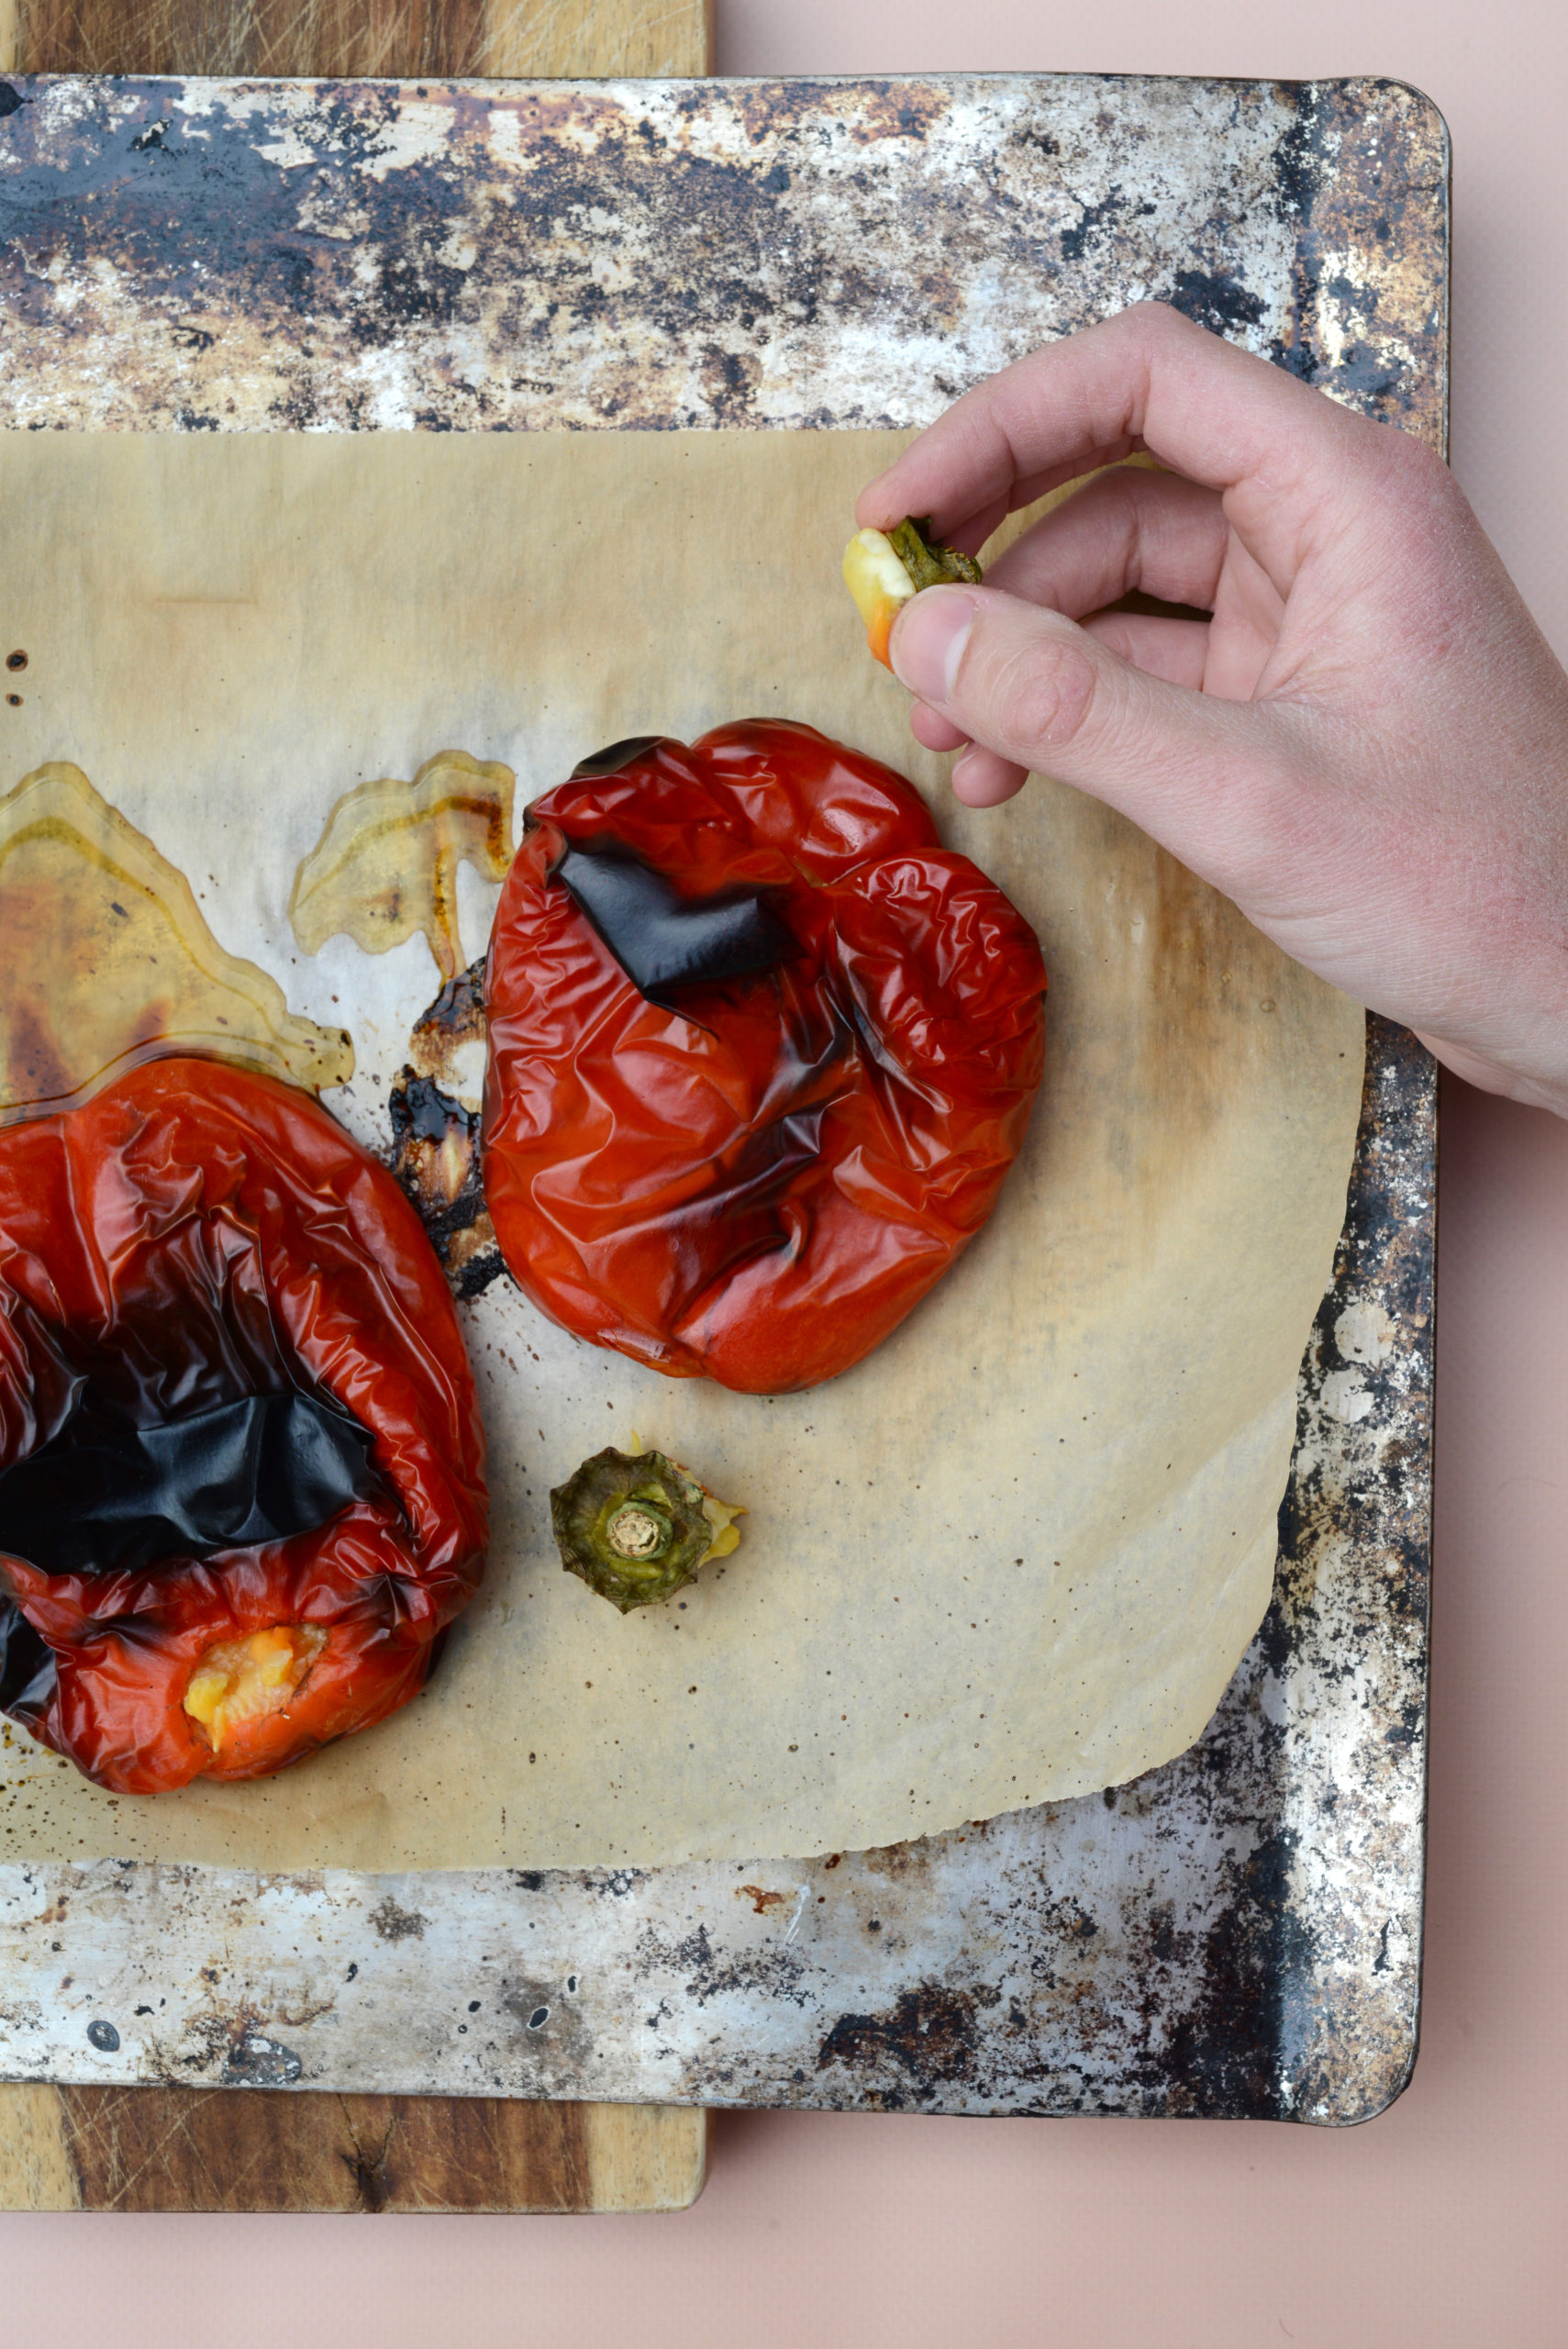 tangy roasted pepper dip [muhammara] red bell peppers after roasting removing stems